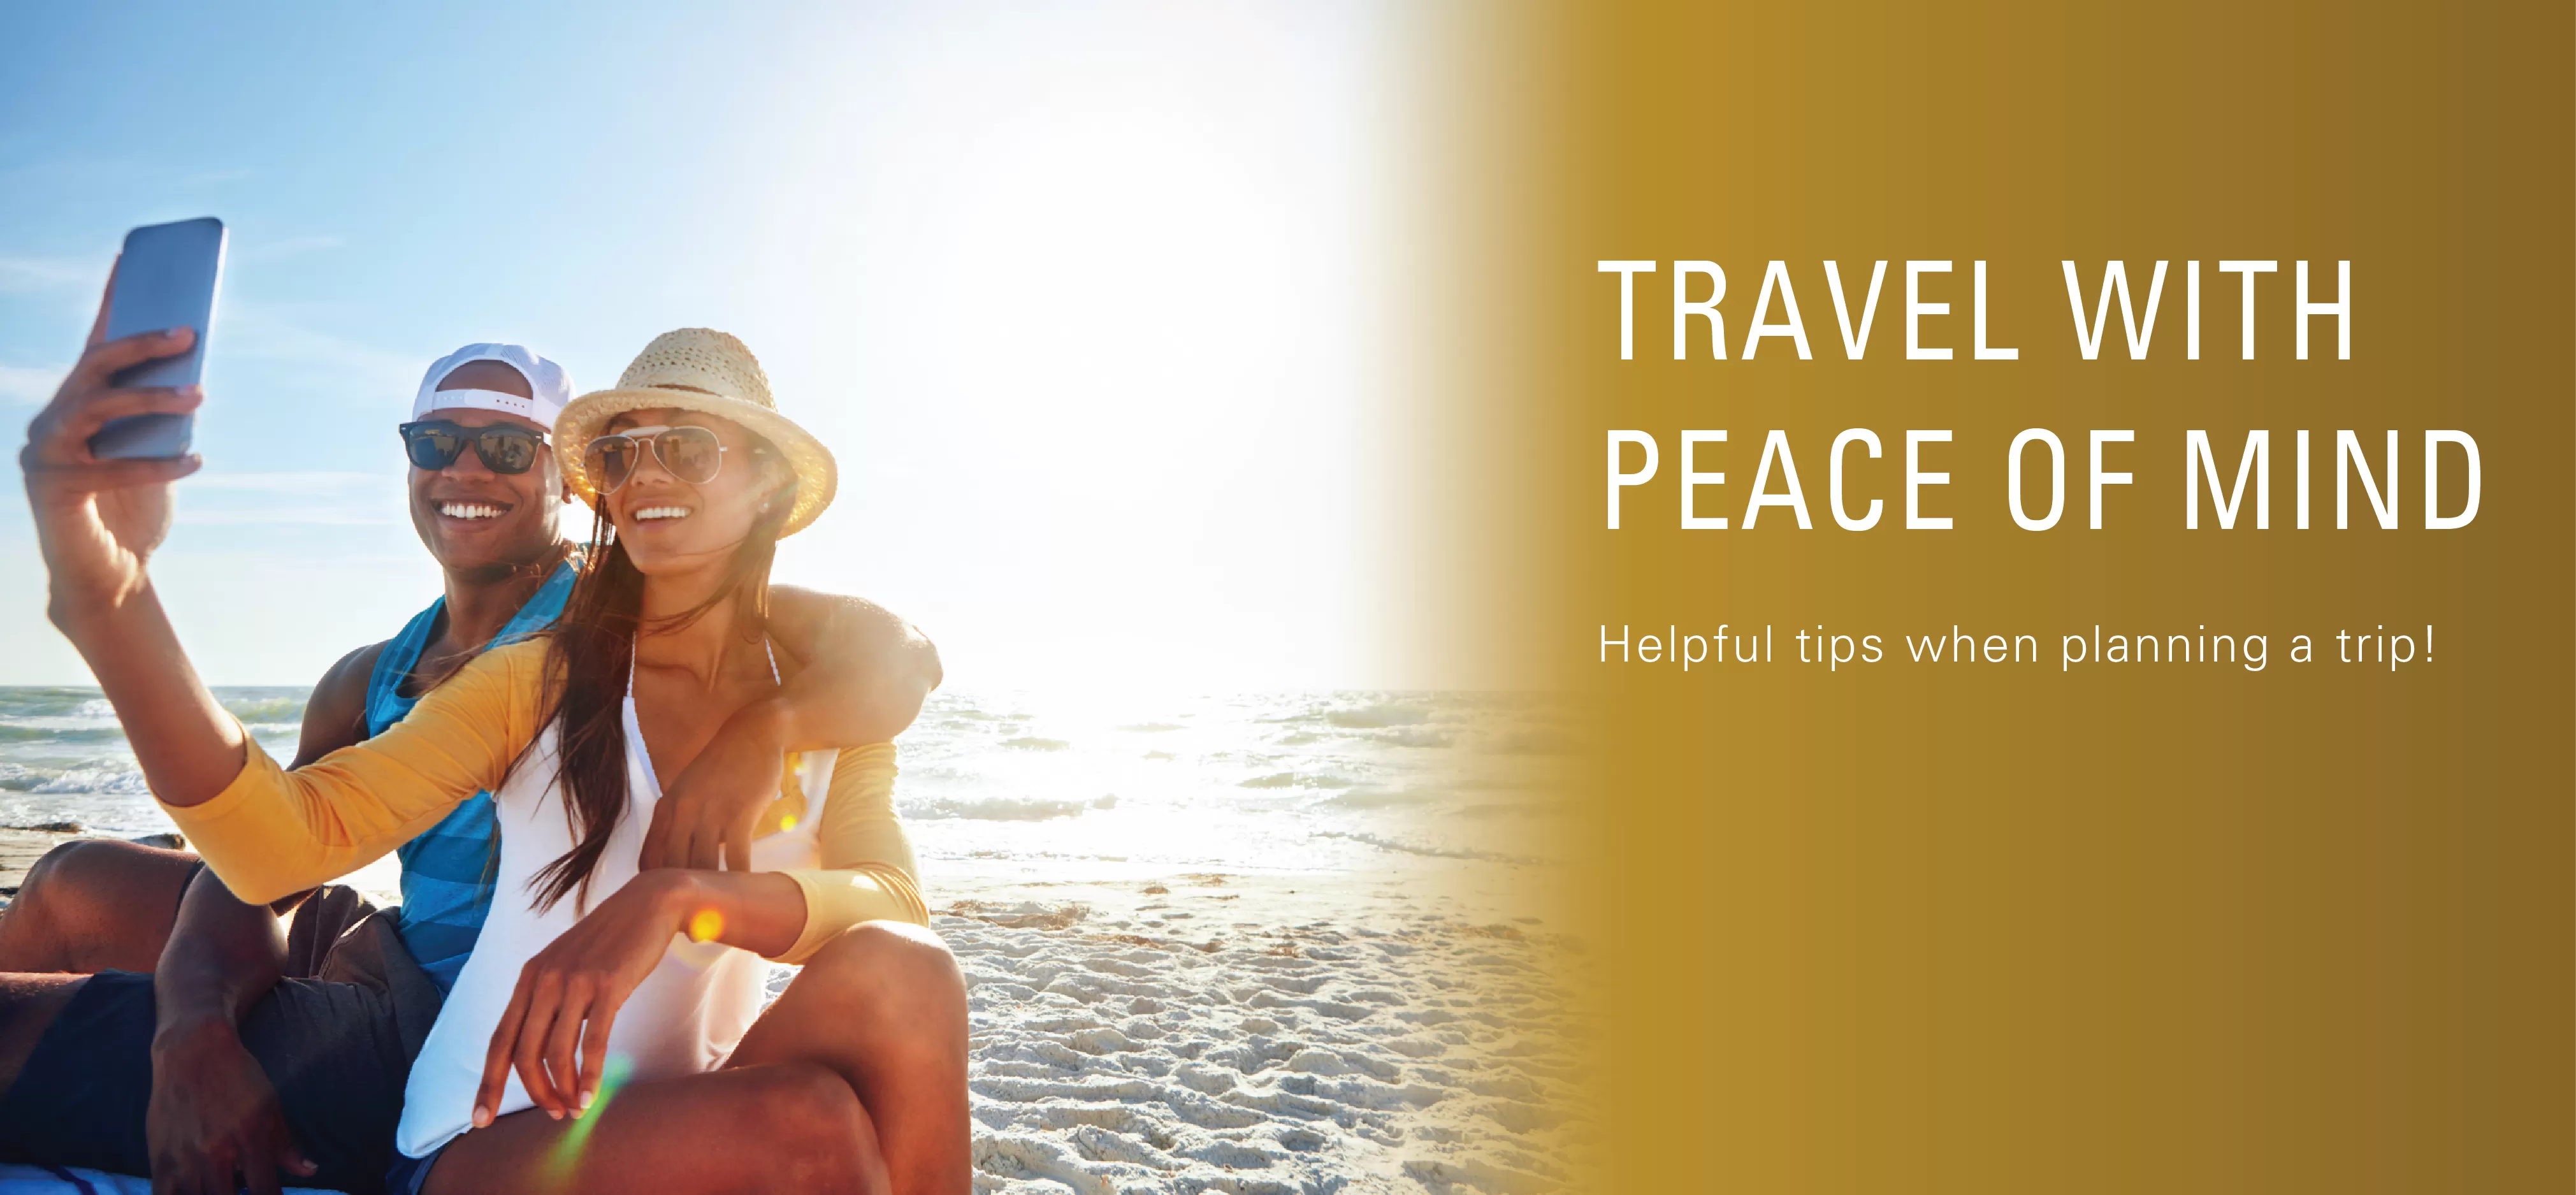 Travel with peace of mind. Helpful tips when planning a trip!